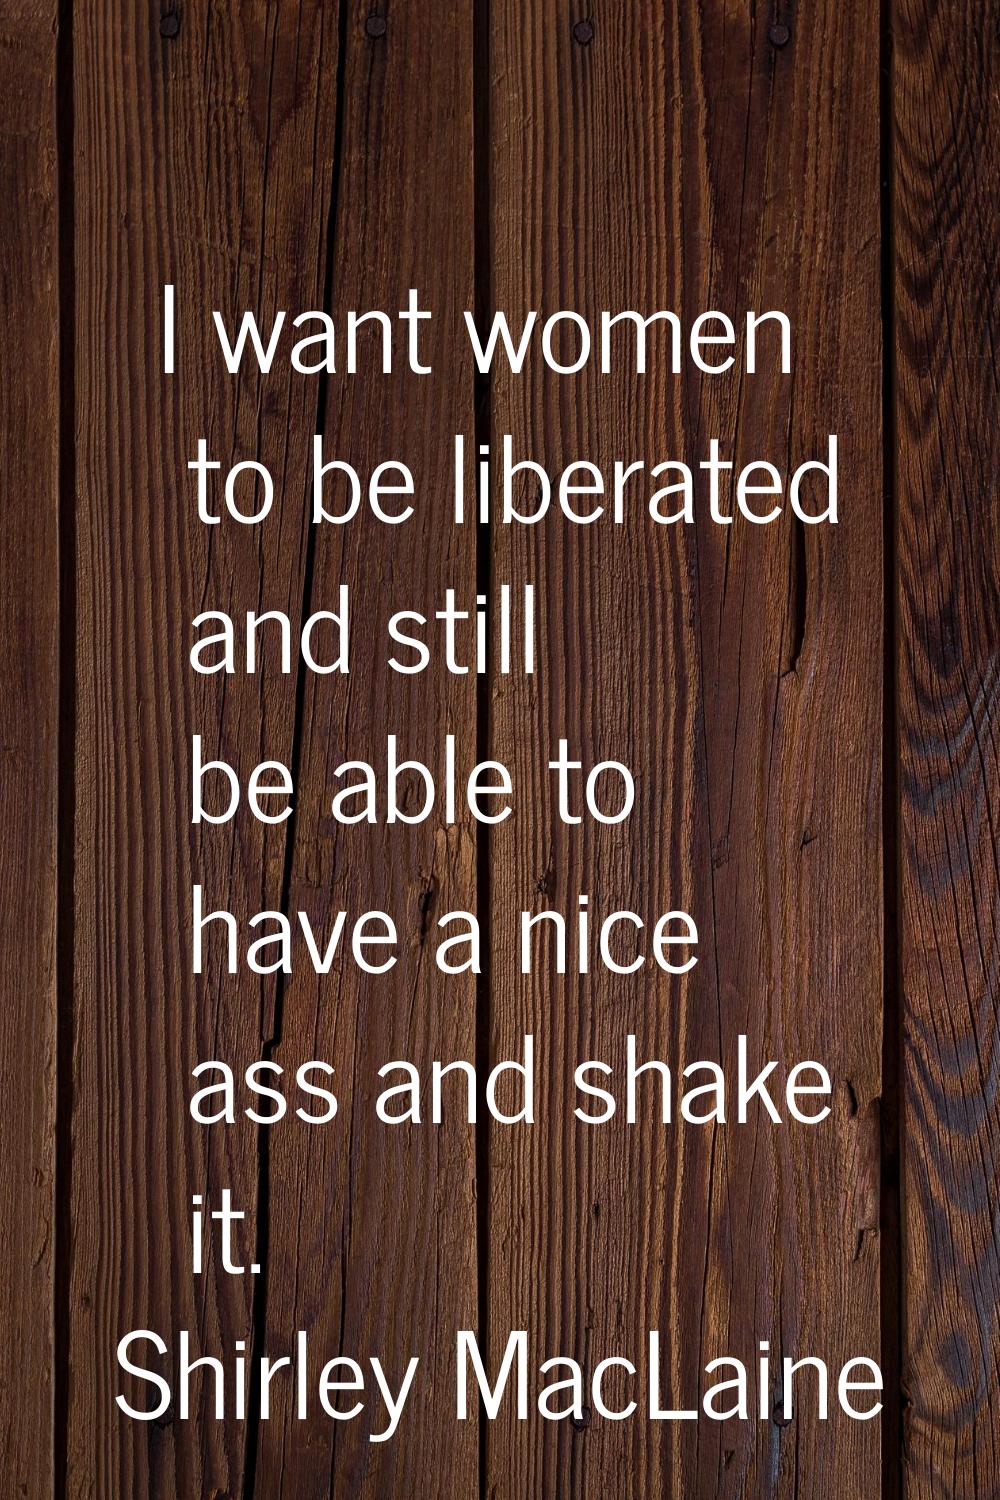 I want women to be liberated and still be able to have a nice ass and shake it.